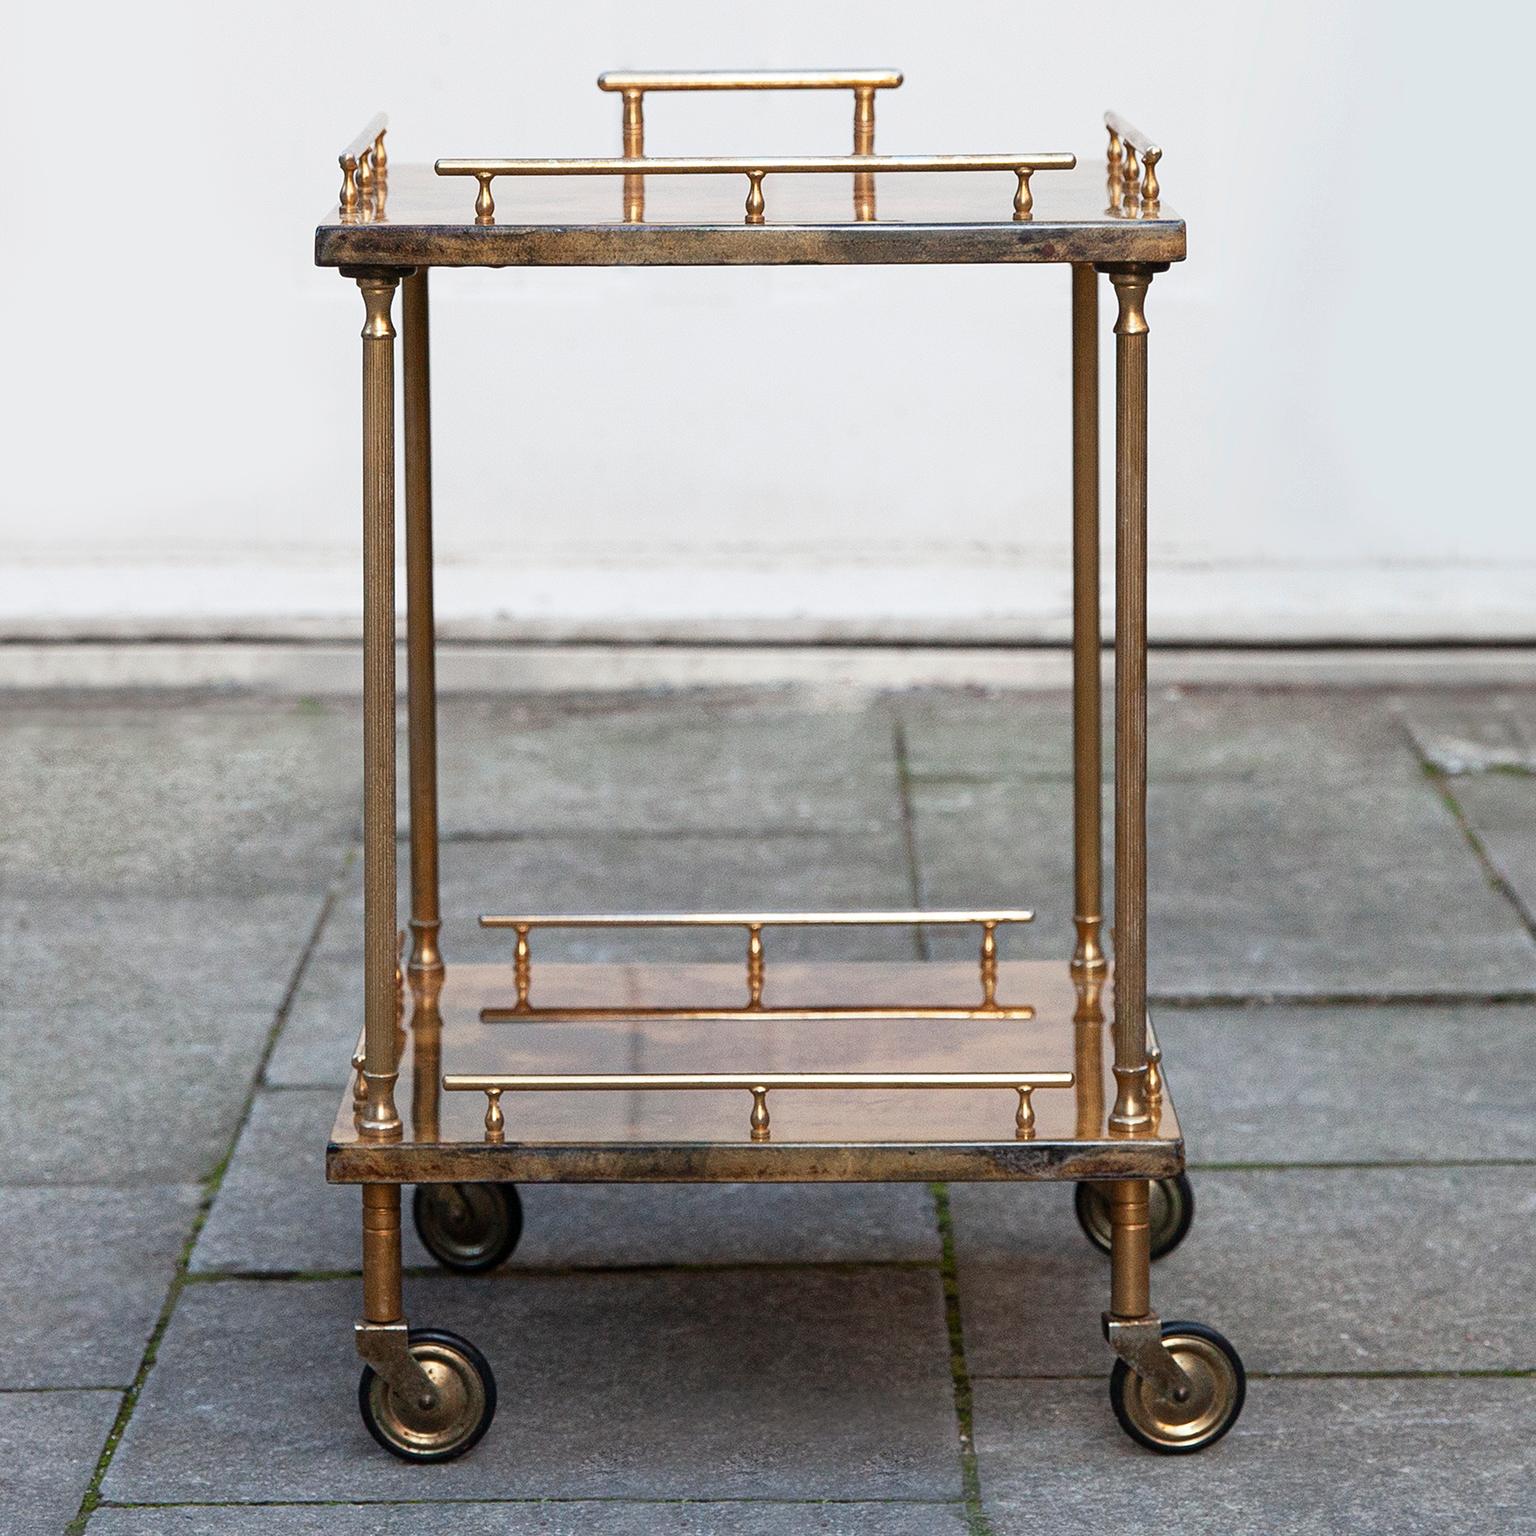 Wonderful serving cart made by Aldo Tura, Italy in the 1960s.

The bar cart was executed in lacquered light brown goatskin with brass applications and it is in nearly excellent condition.

Along with artists like Piero Fornasetti and Carlo